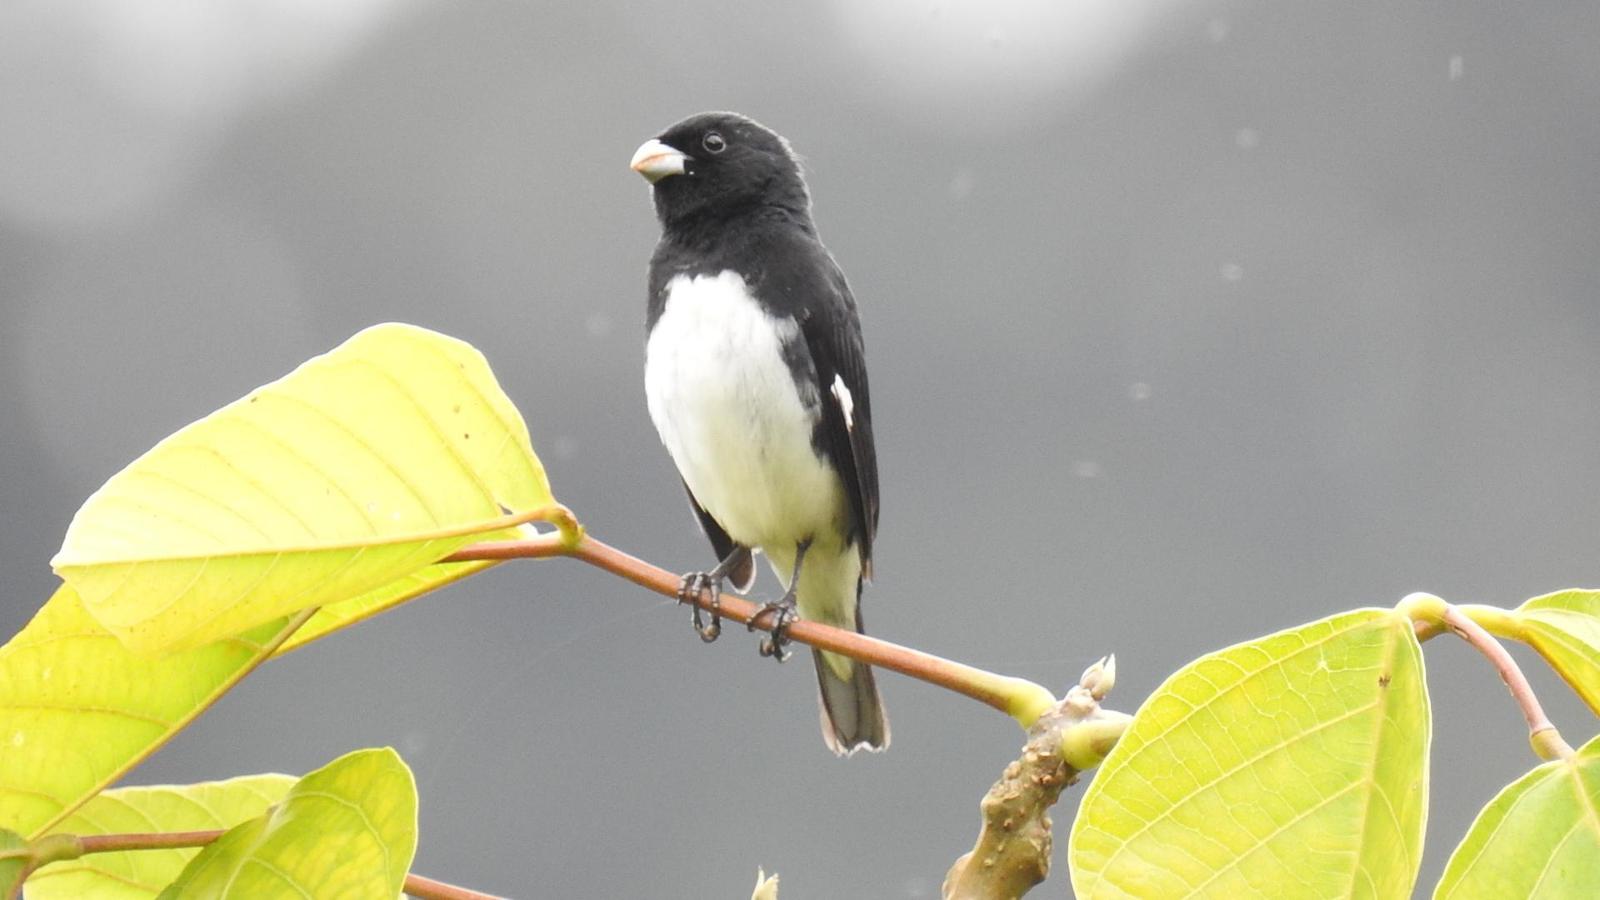 Black-and-white Seedeater Photo by Julio Delgado